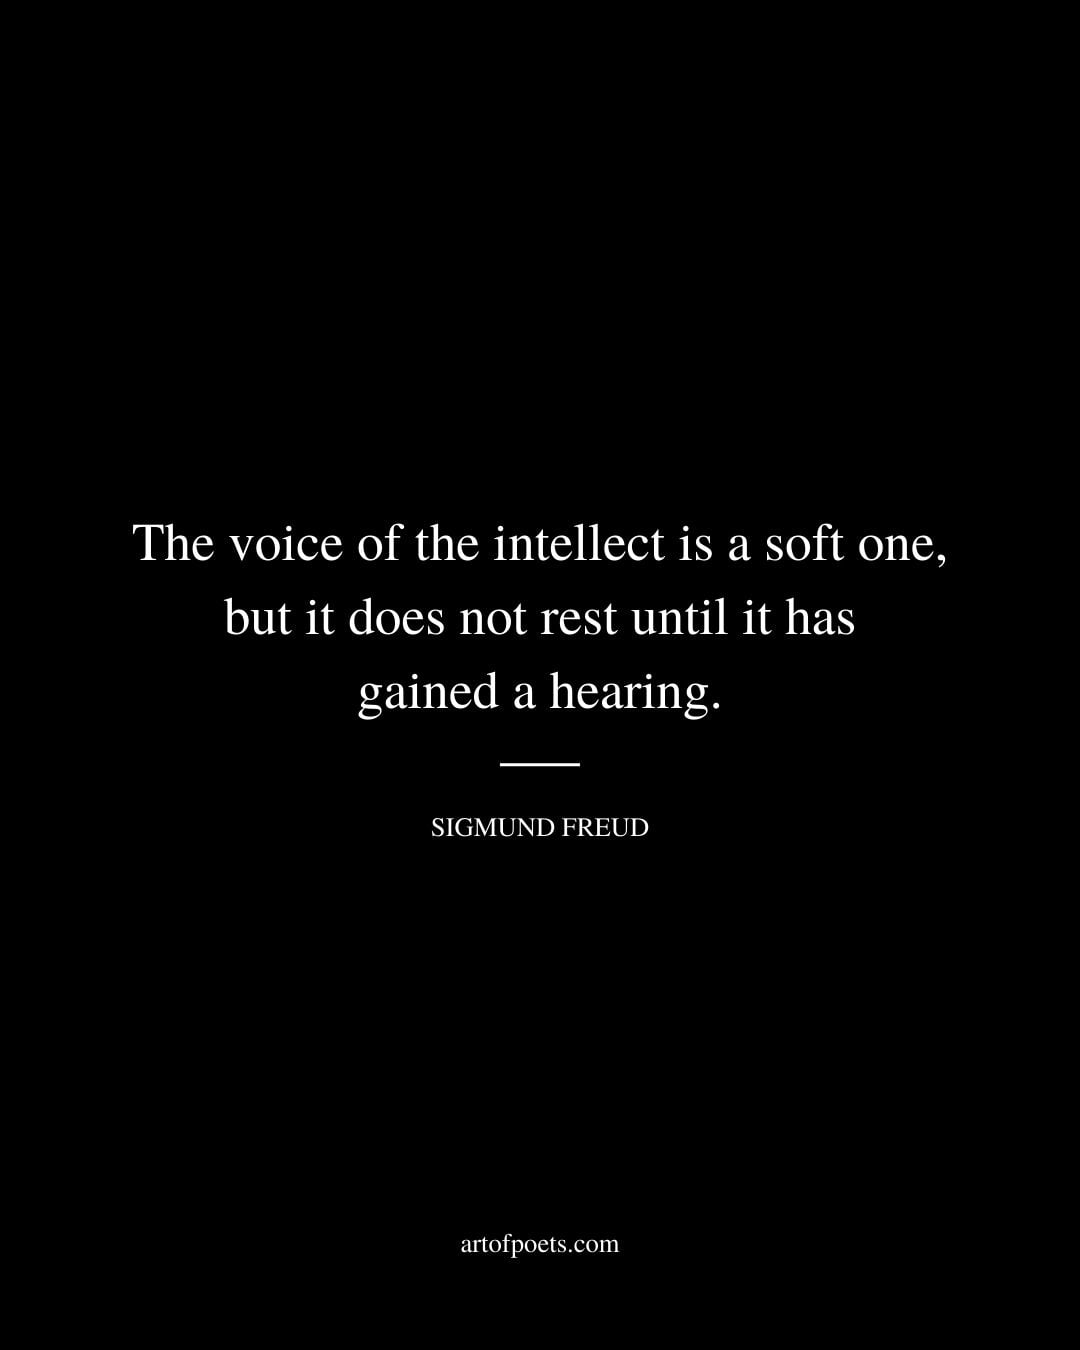 The voice of the intellect is a soft one but it does not rest until it has gained a hearing